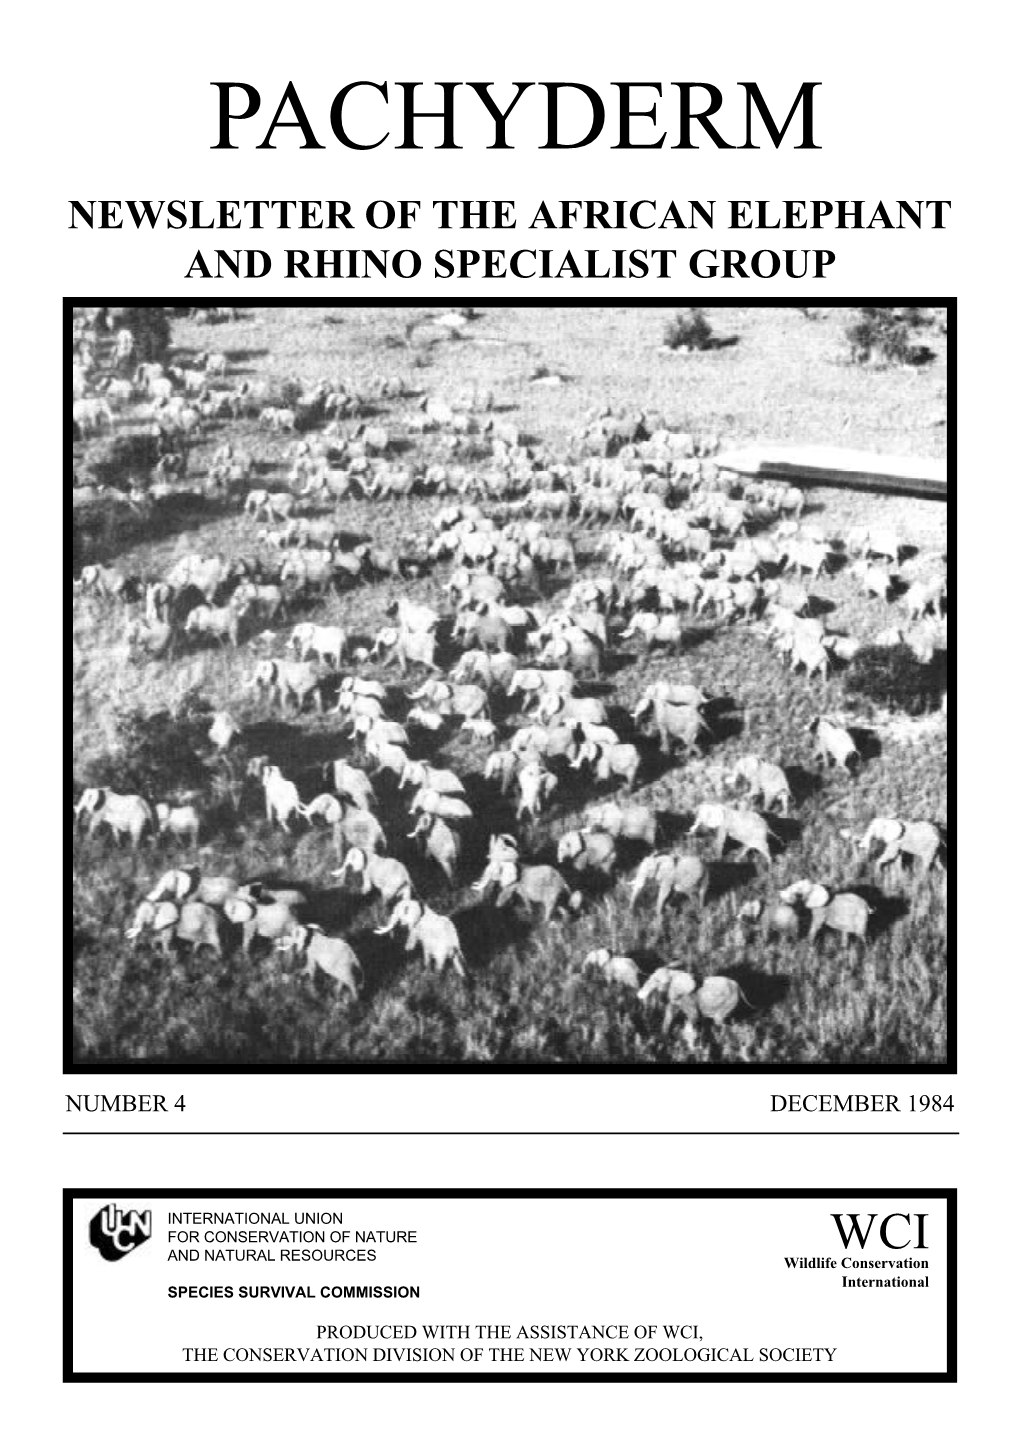 Pachyderm Newsletter of the African Elephant and Rhino Specialist Group